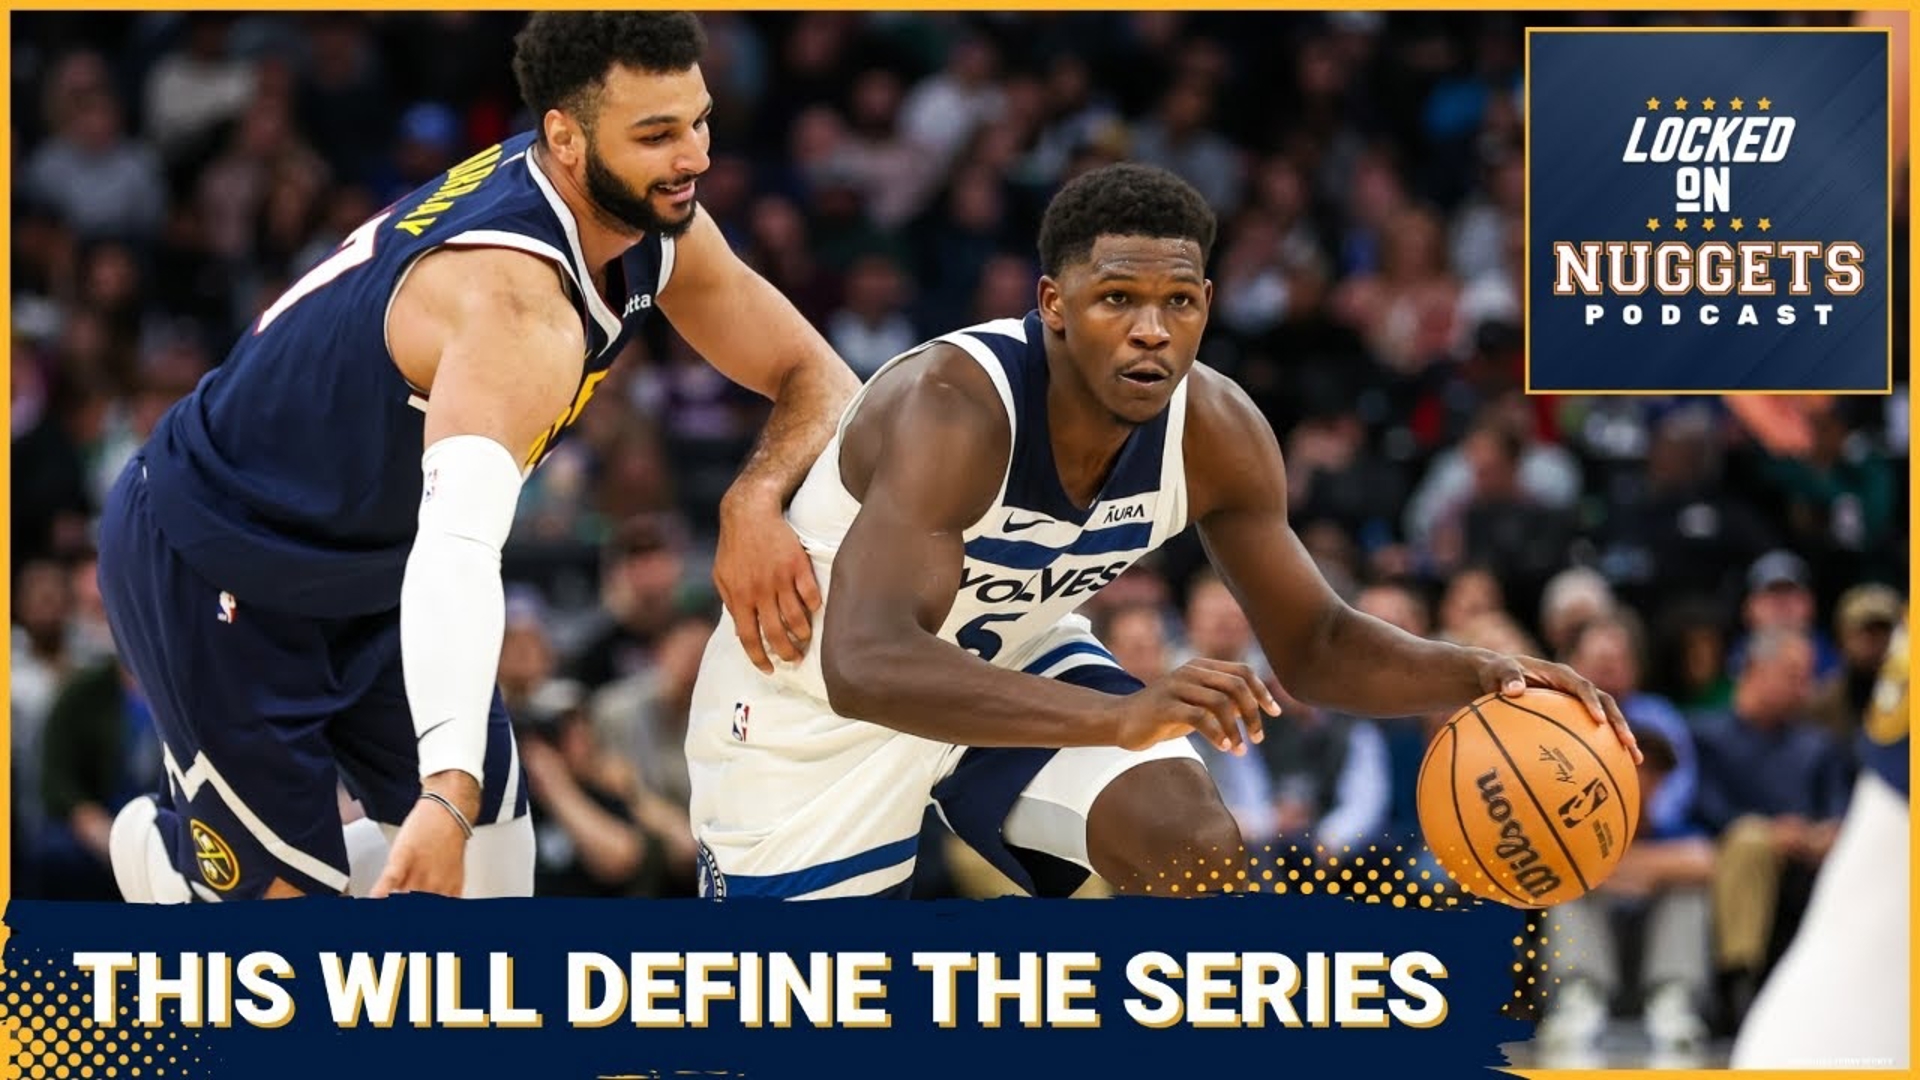 The Denver Nuggets will look to continue their title defense vs the Minnesota Timberwolves and the Jamal Murray Vs. Anthony Edwards matchup will be box office.